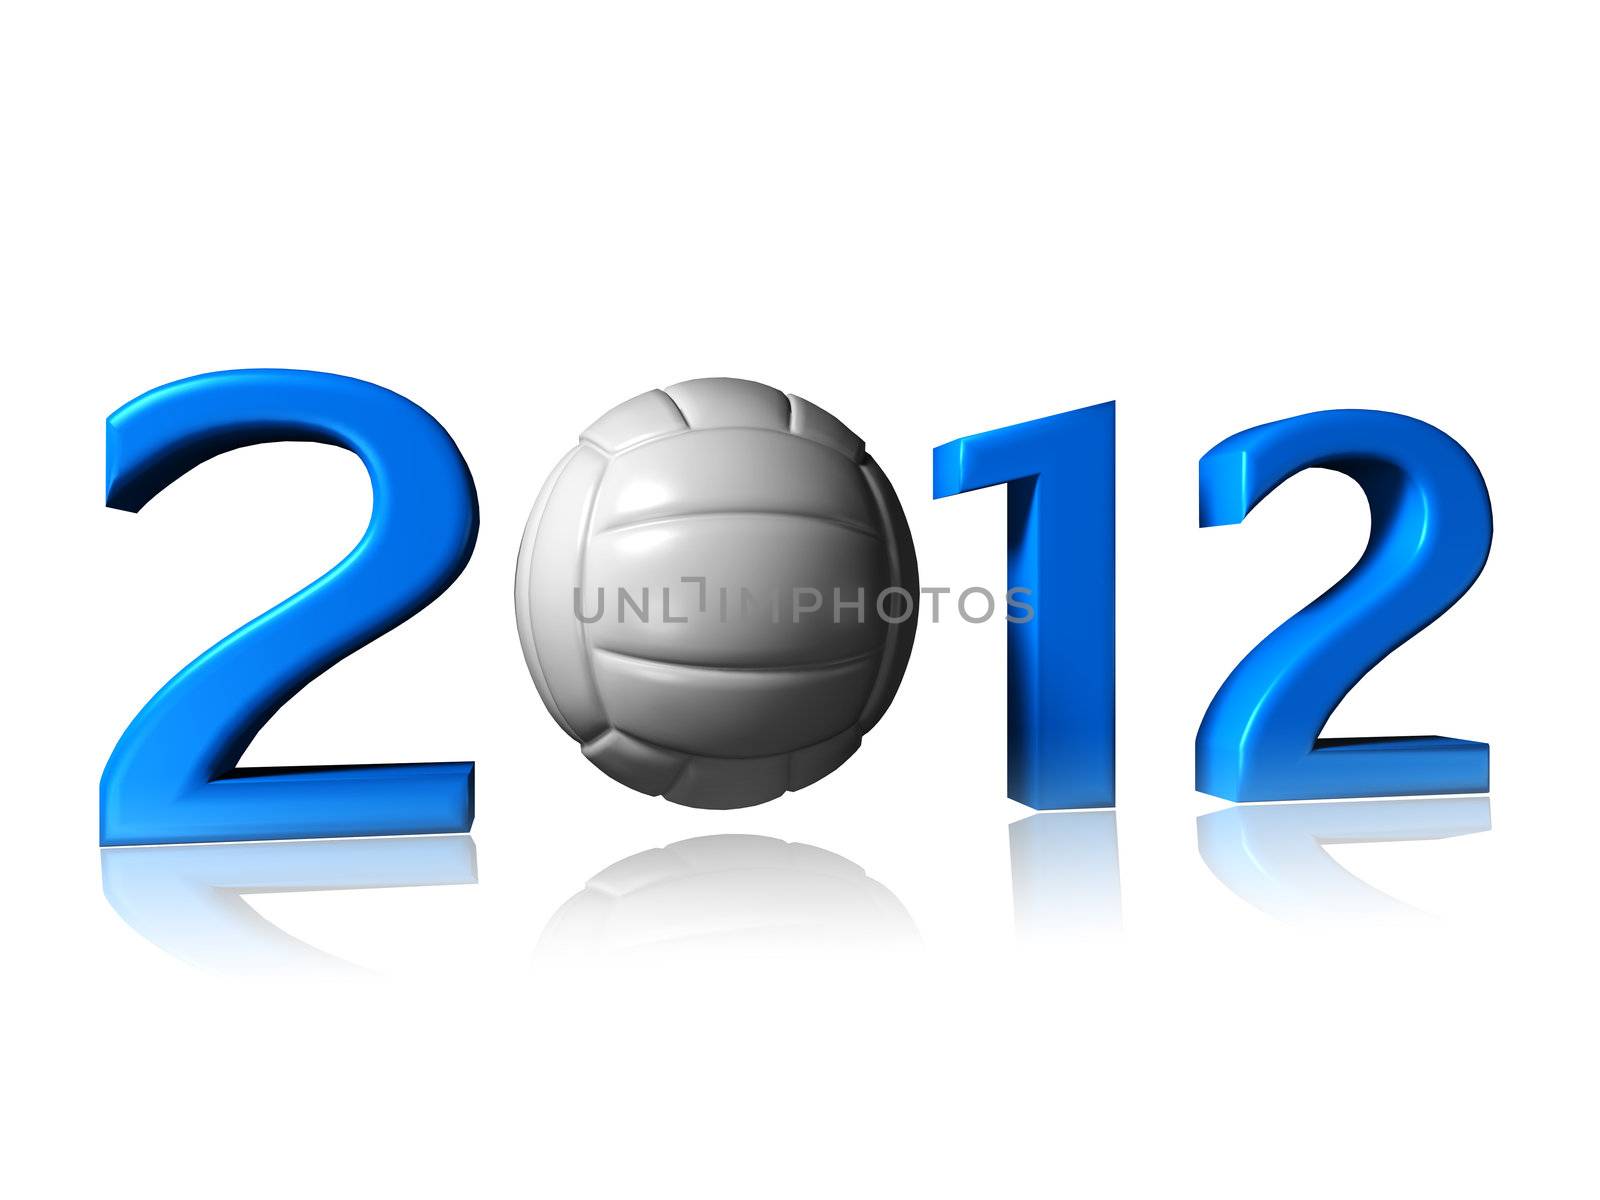 It's a big 2012 volley logo on a white background